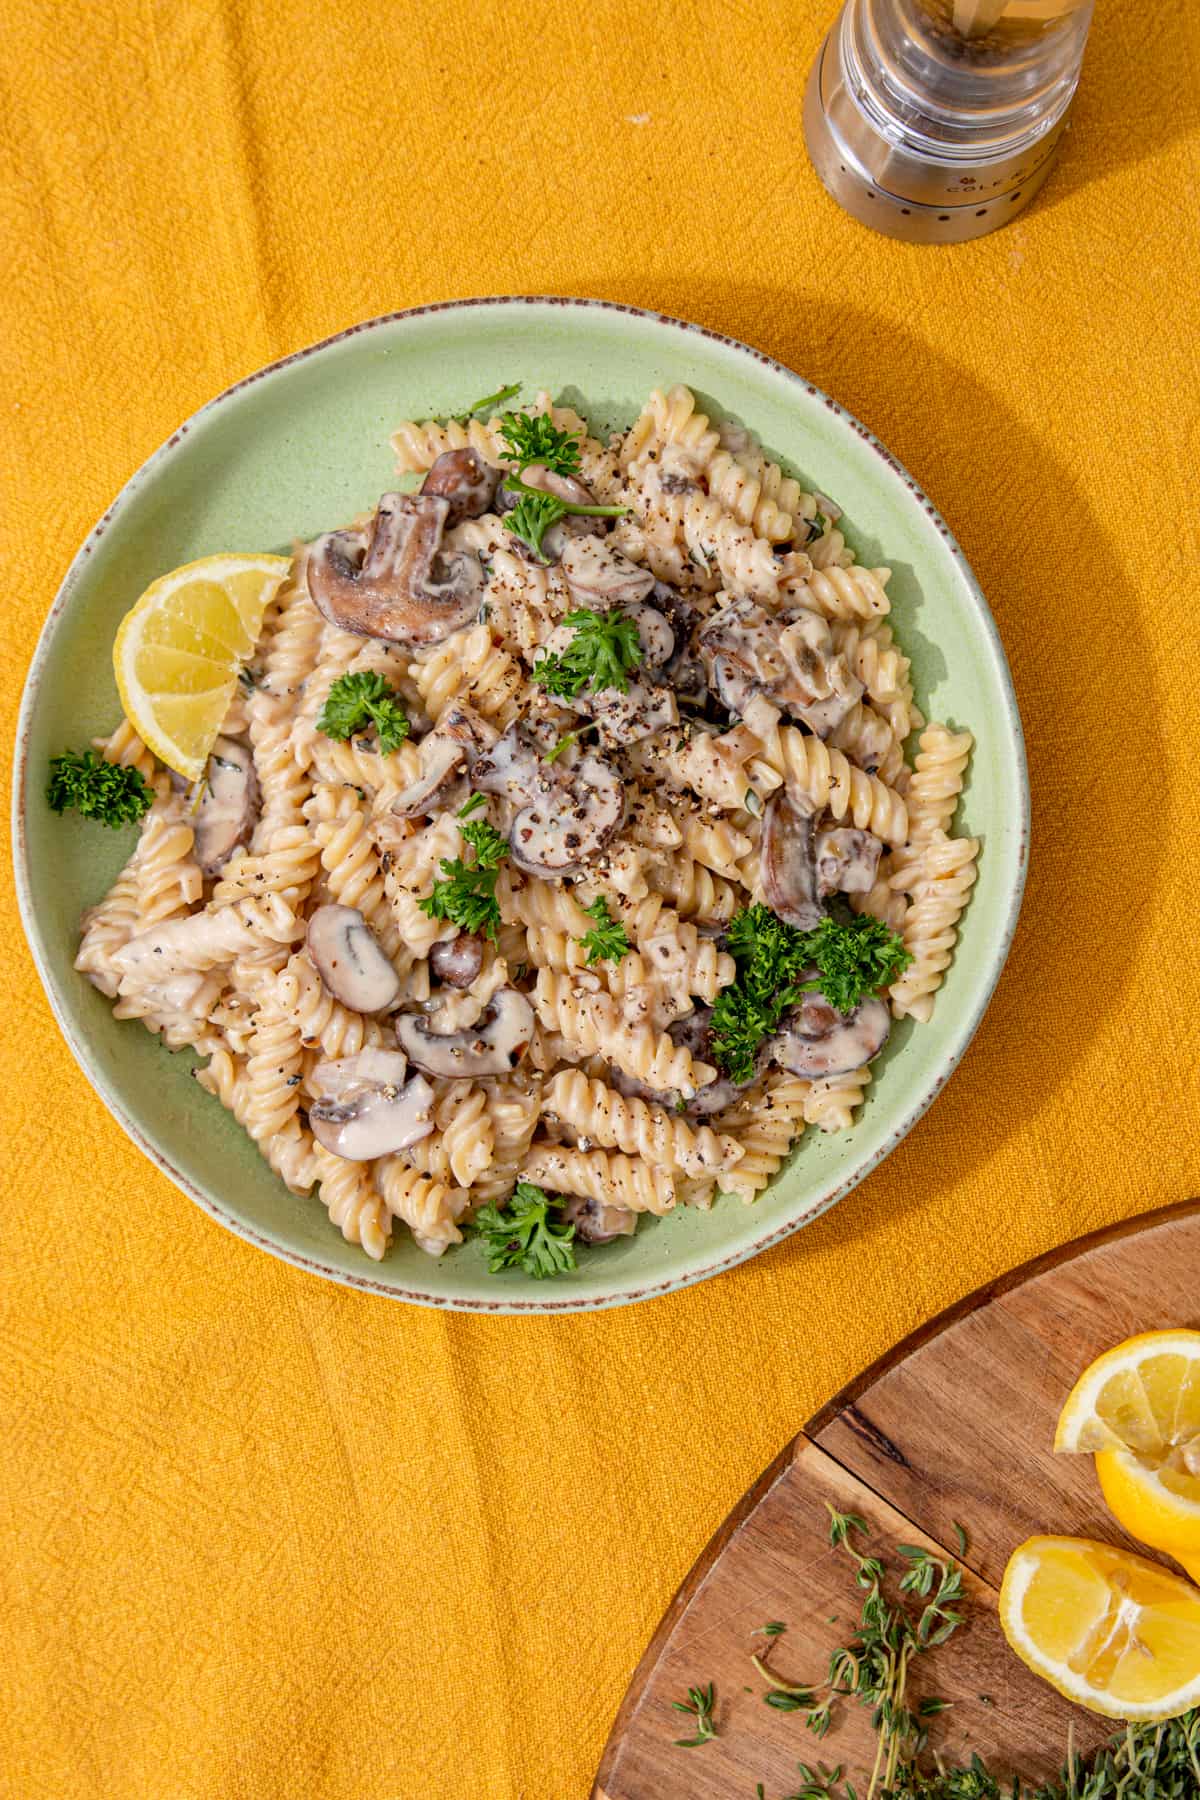 A bowl of pasta and mushrooms in a sauce with a wedge of lemon and a copping board with lemon wedges.